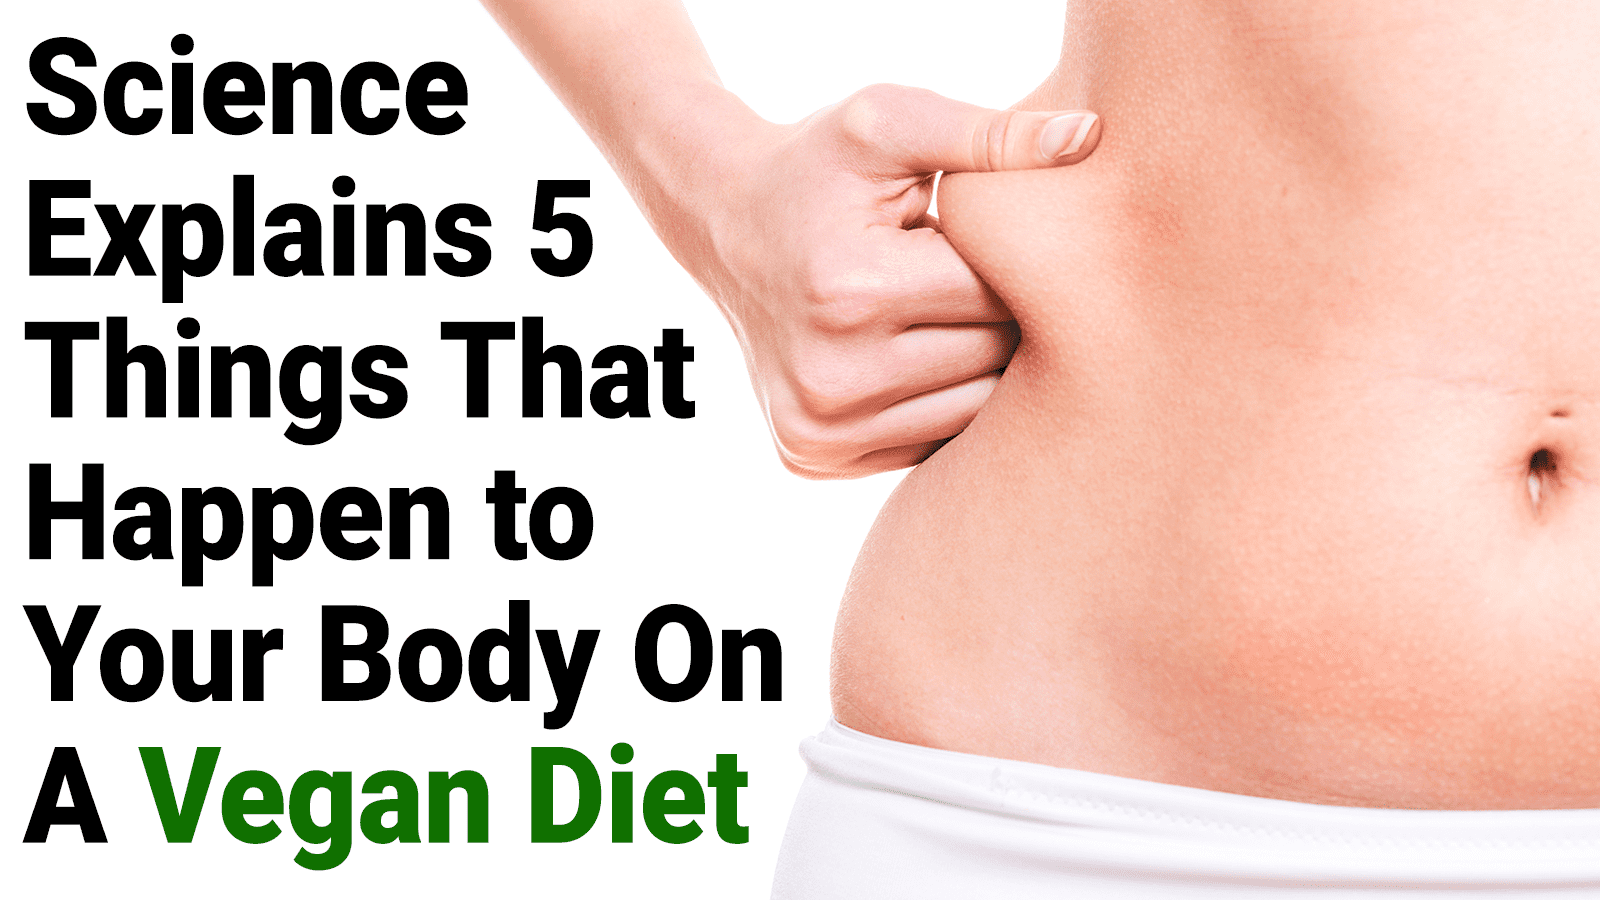 Science Explains 5 Things That Happen to Your Body On A Vegan Diet